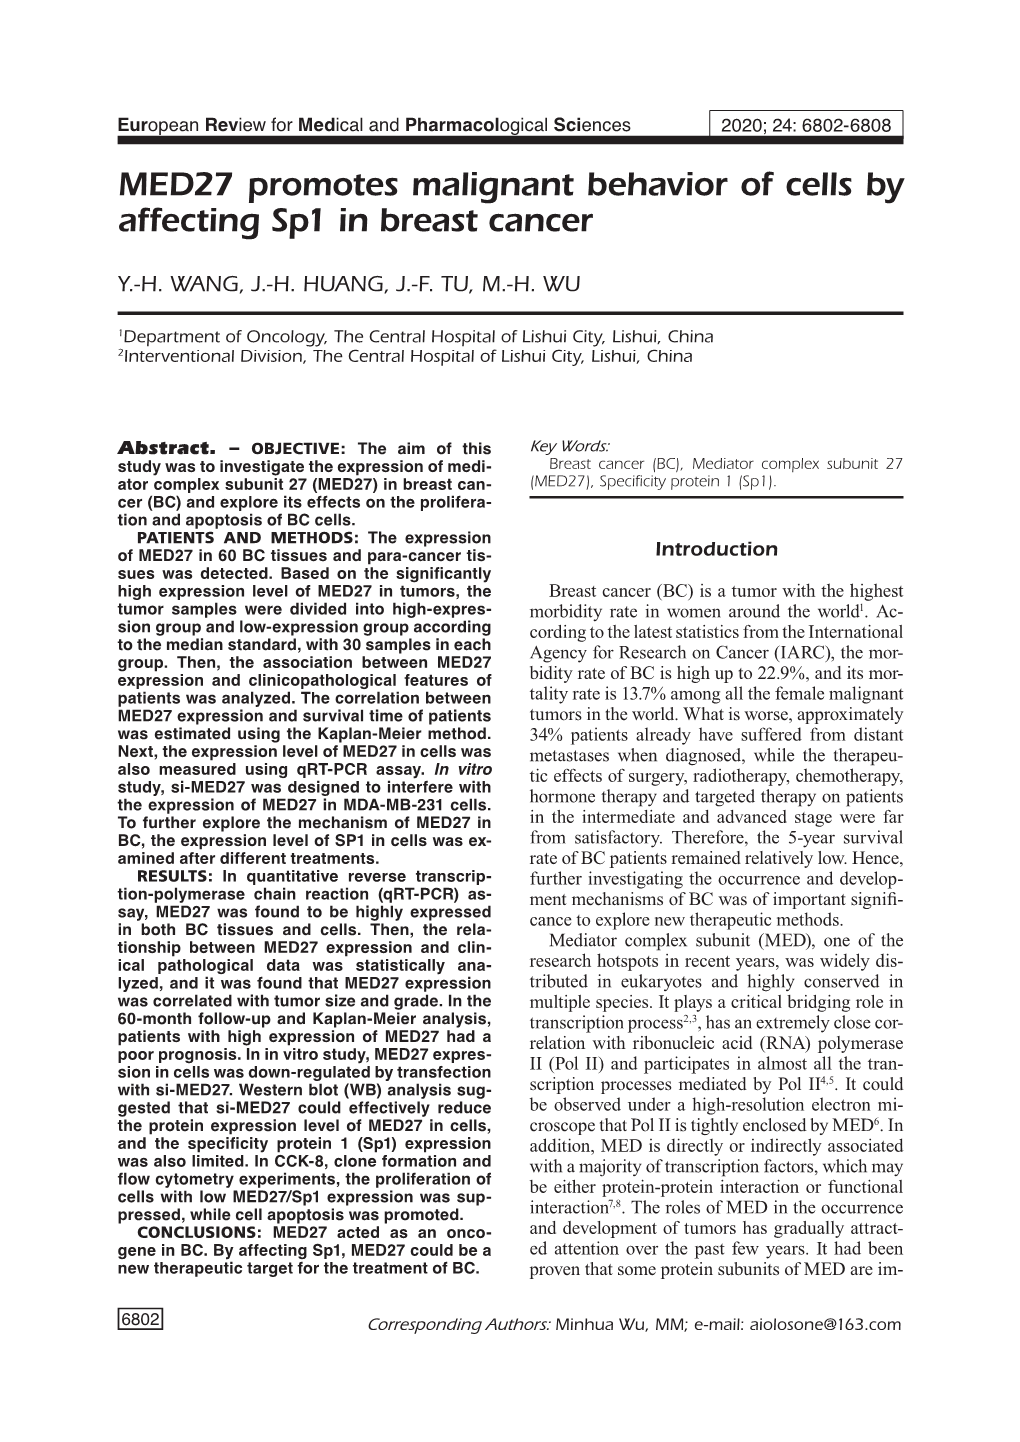 MED27 Promotes Malignant Behavior of Cells by Affecting Sp1 in Breast Cancer